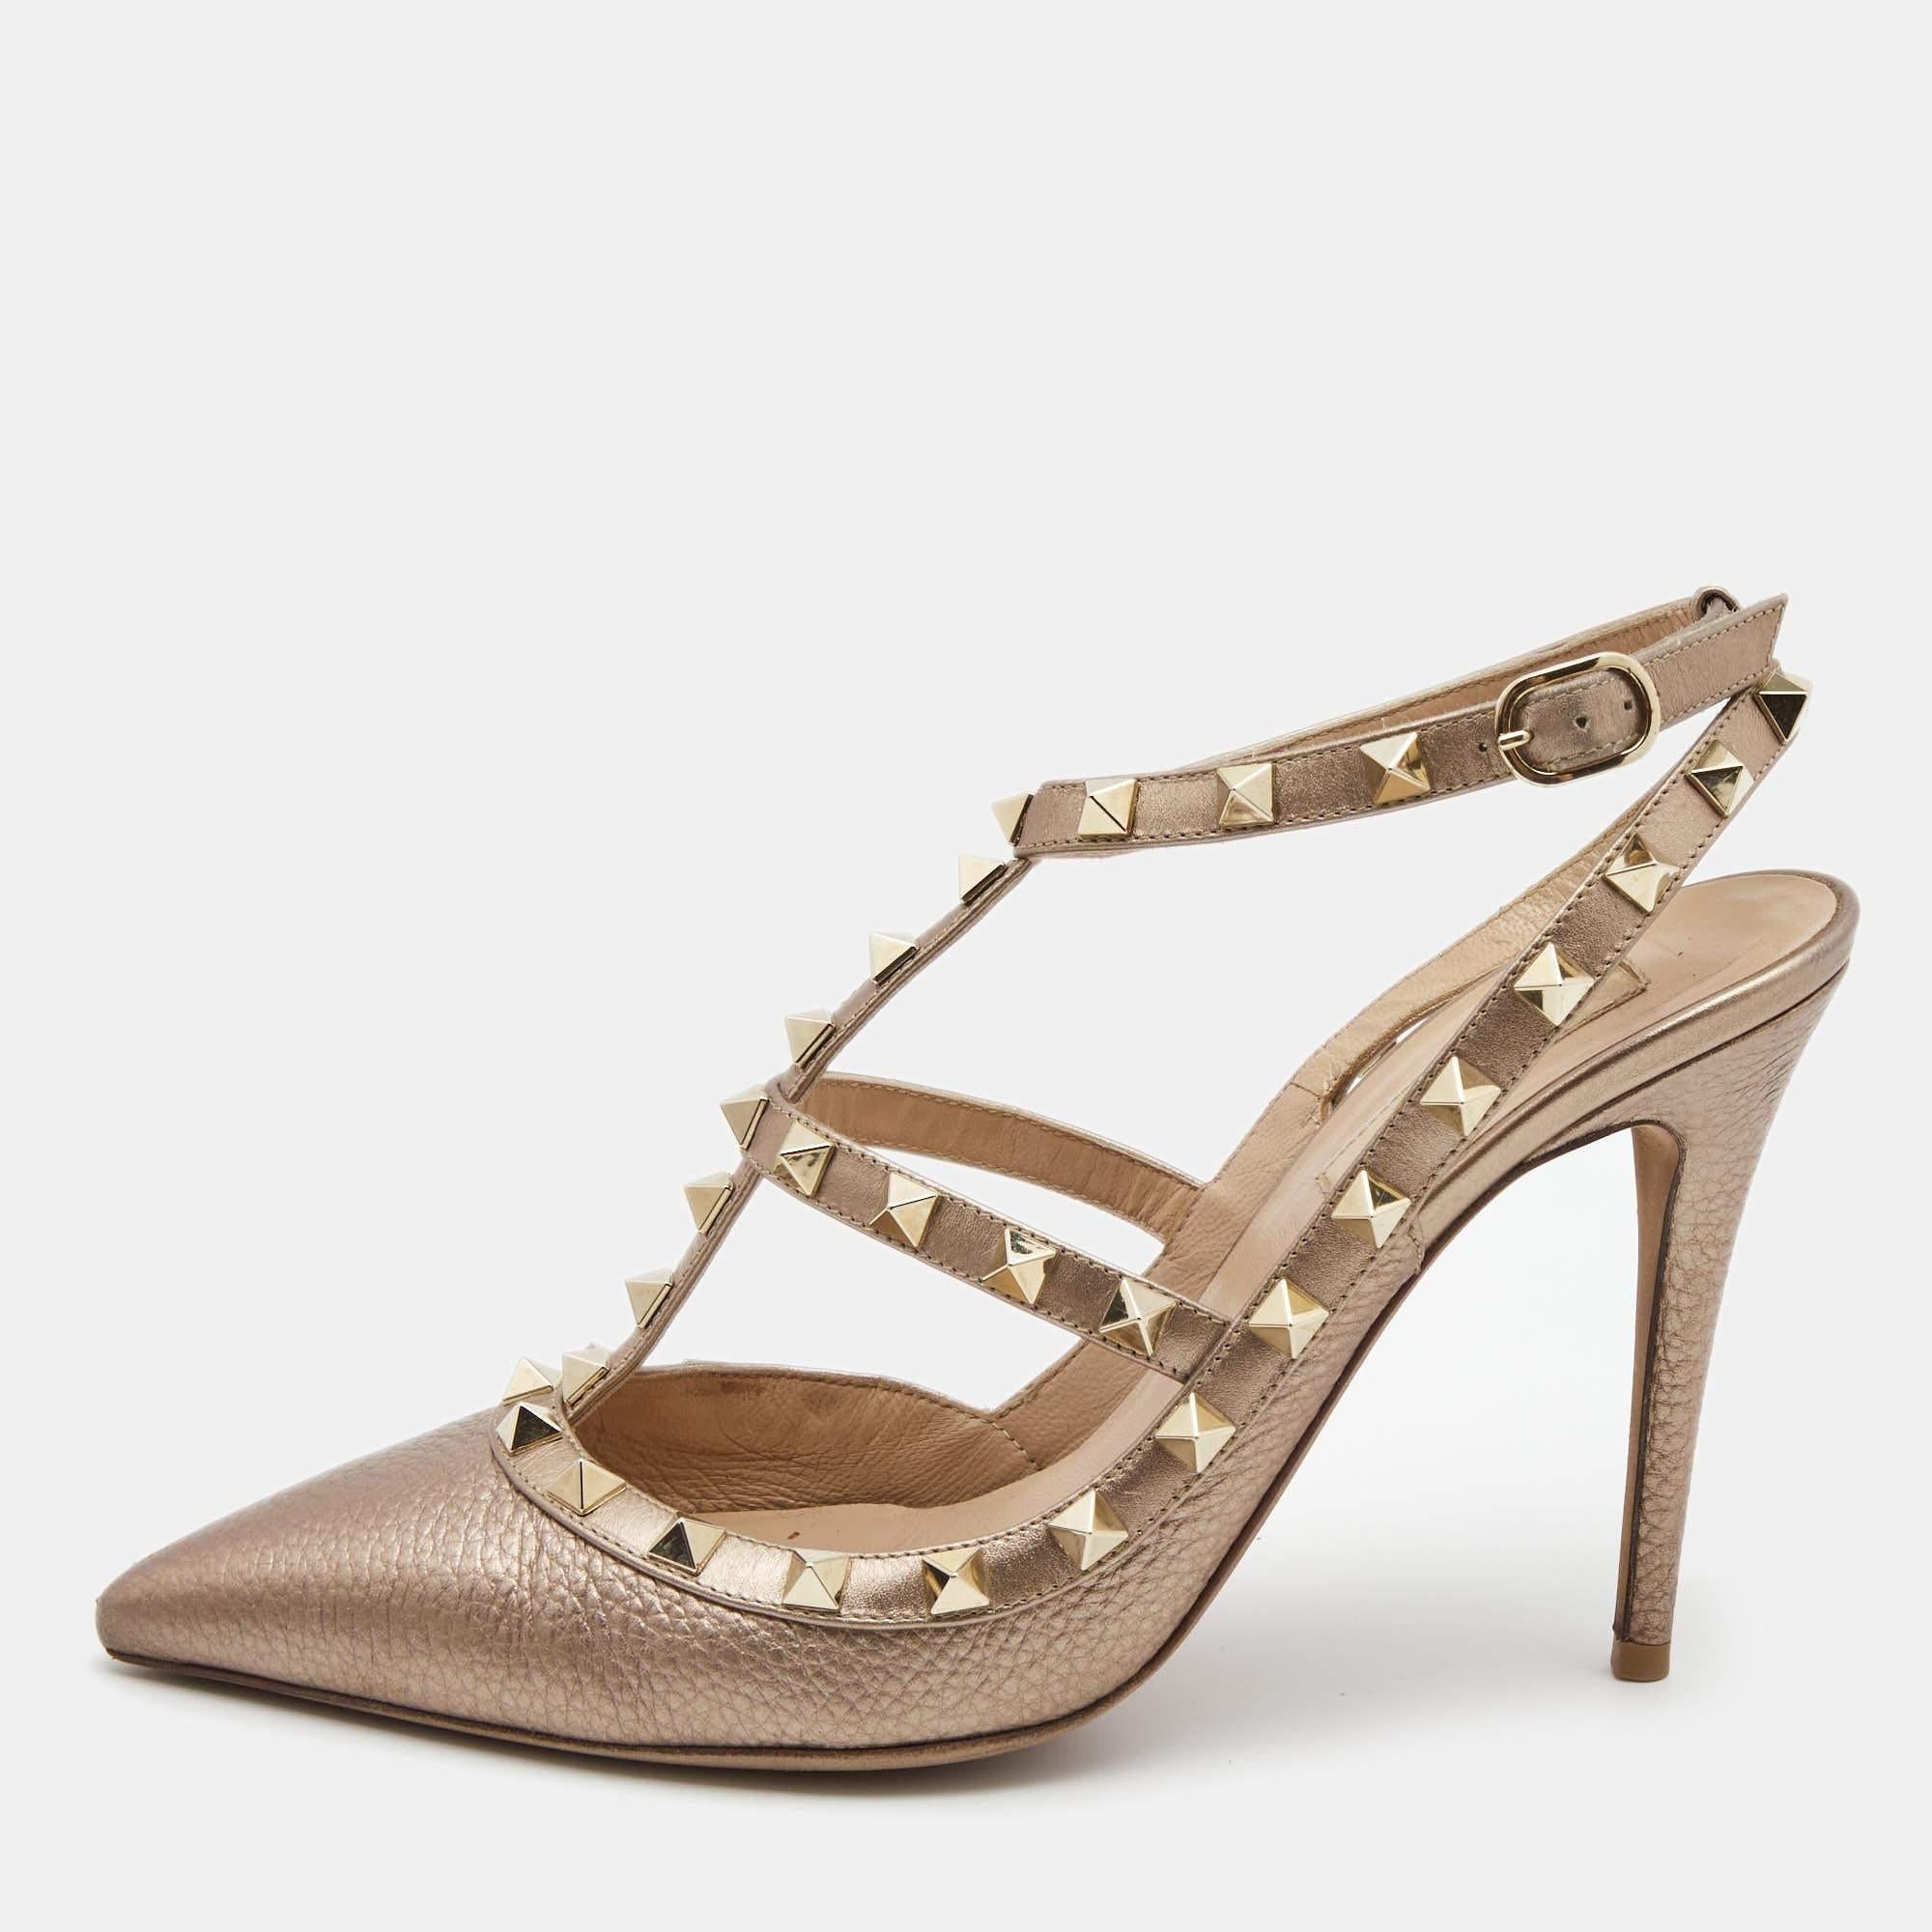 Valentino Metallic Leather Rockstud Strappy Pointed Toe Pumps Size 39 5